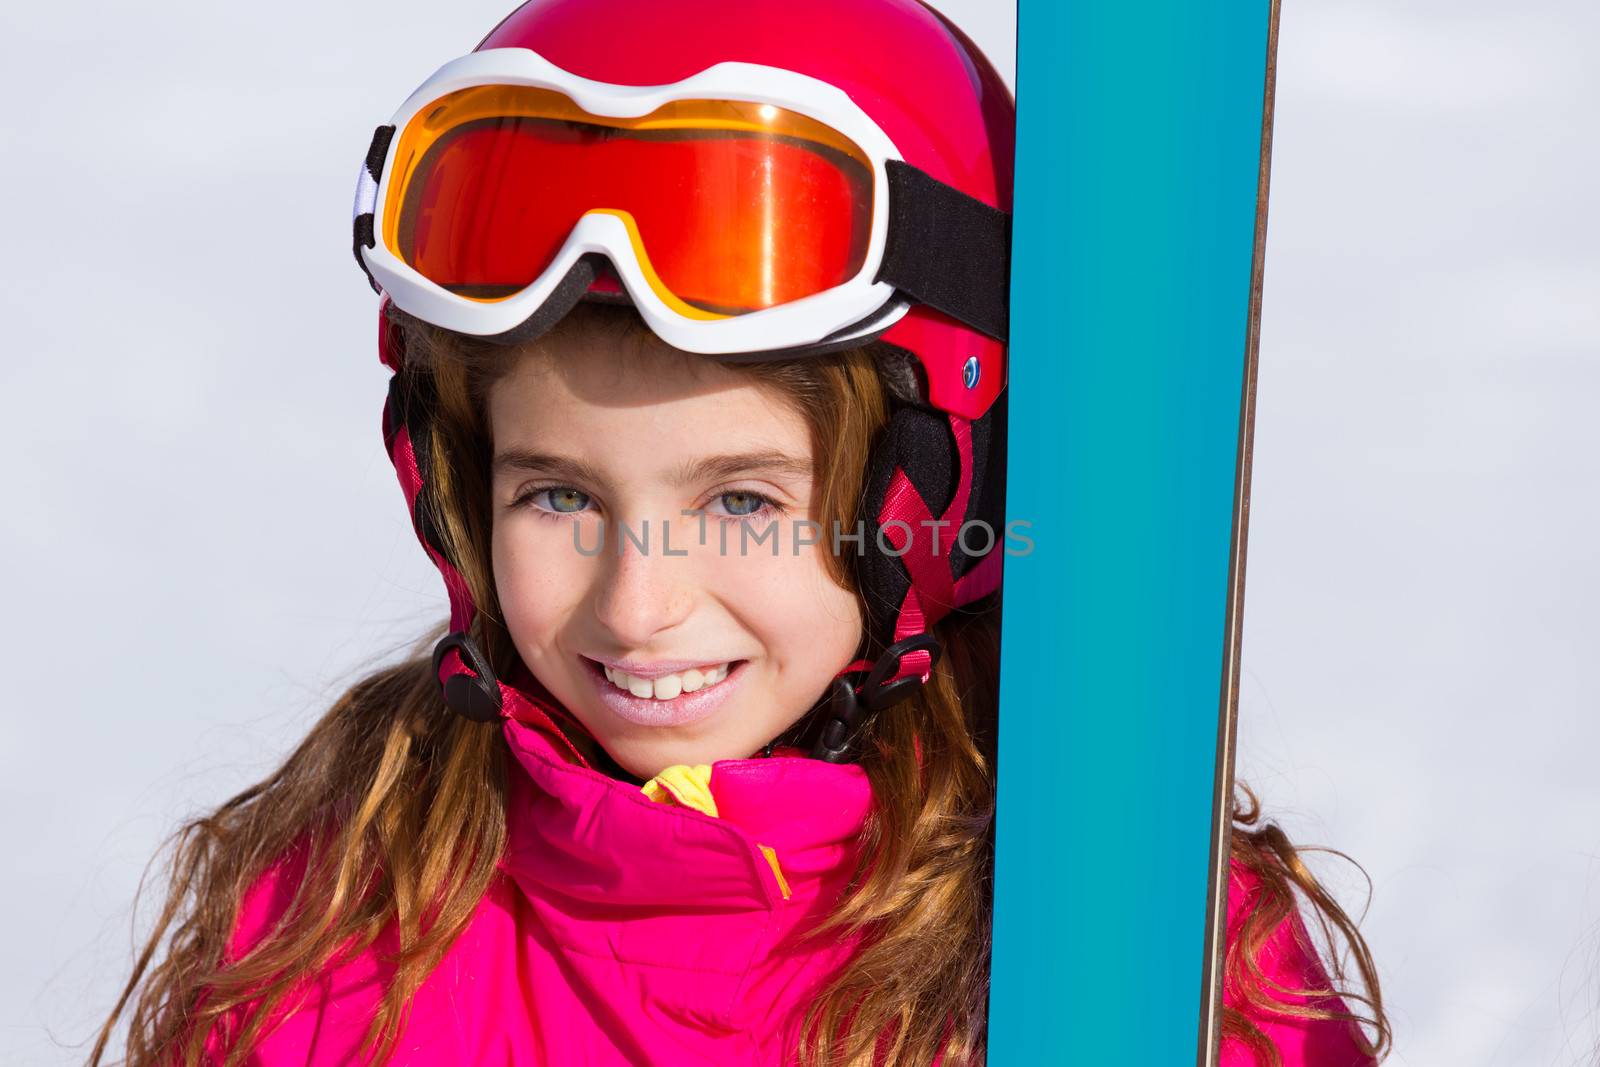 Kid girl winter snow portrait with ski equipment helmet and goggles